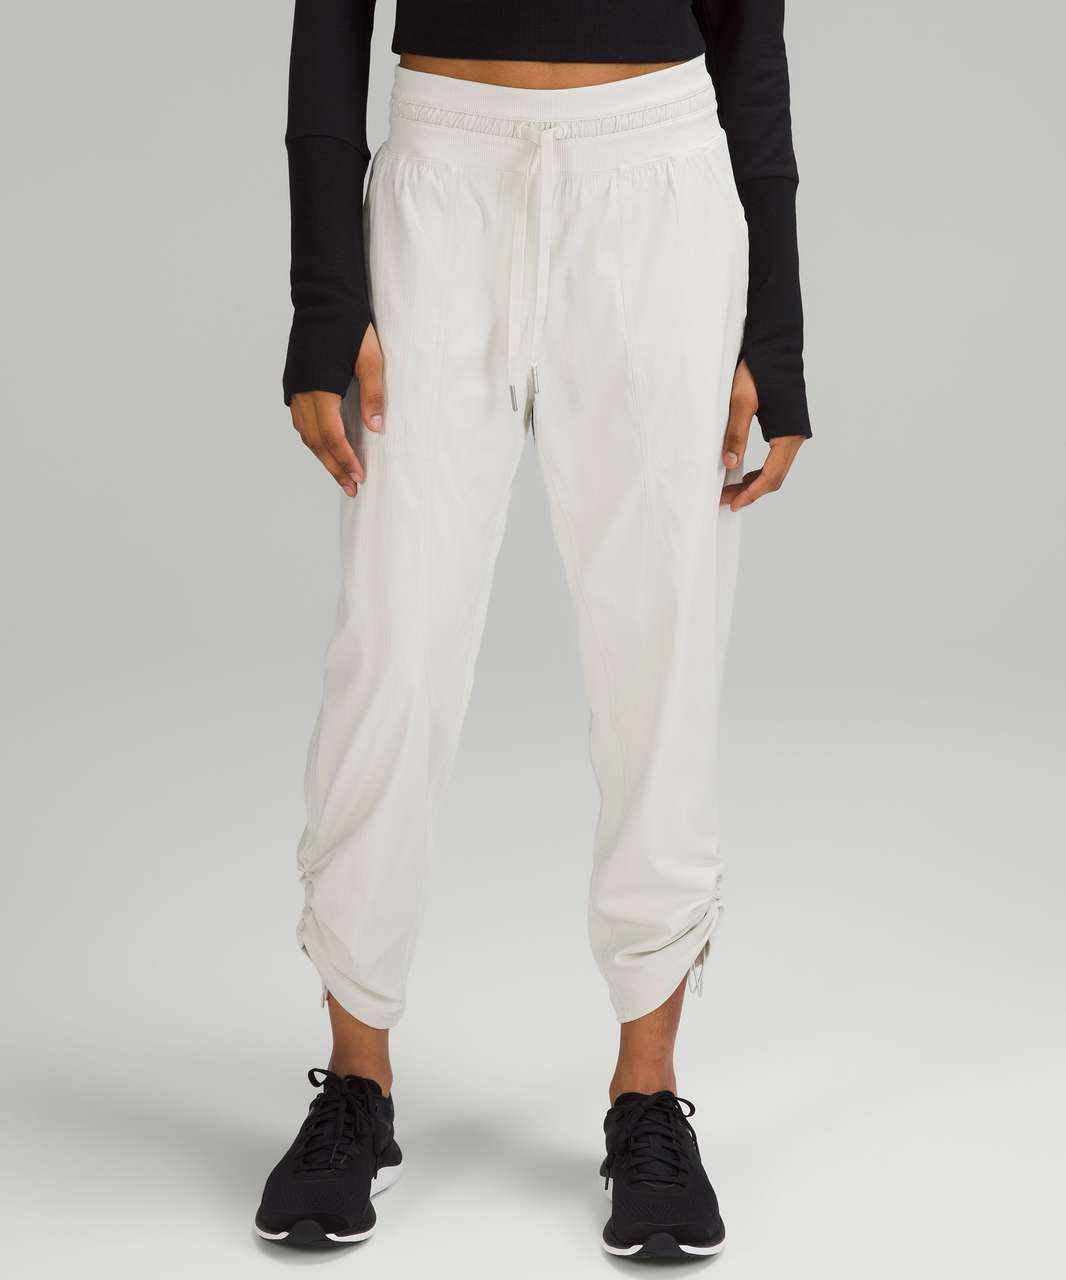 Lululemon NWT Dance Studio Mid-Rise Cropped Pants PLMC Size 6 - $74 New  With Tags - From Harley